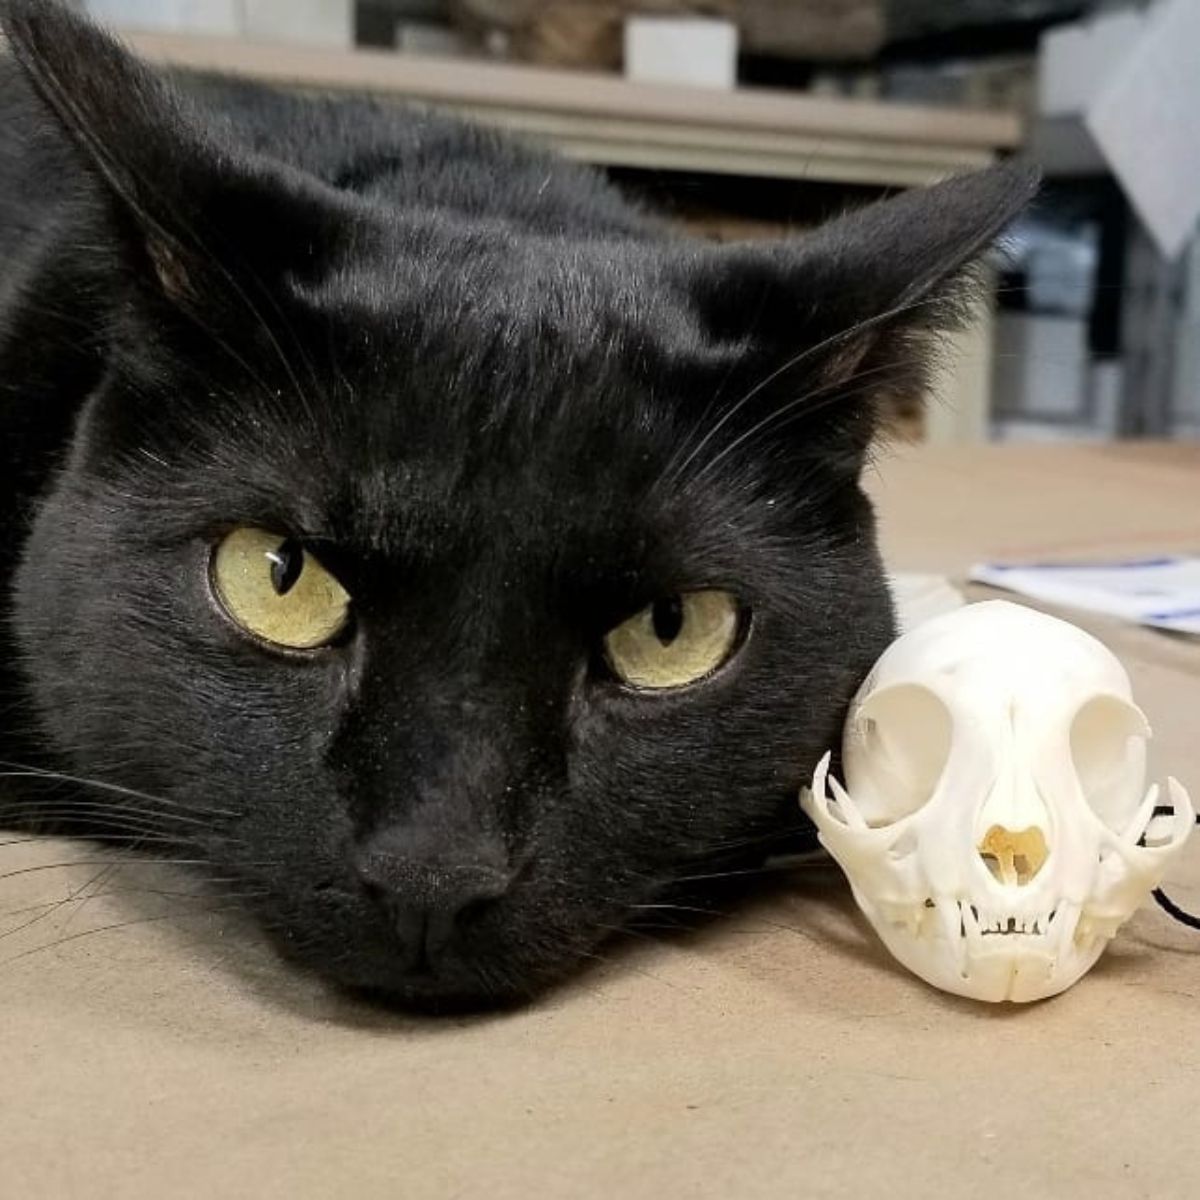 close-up photo of cat next to a small skull